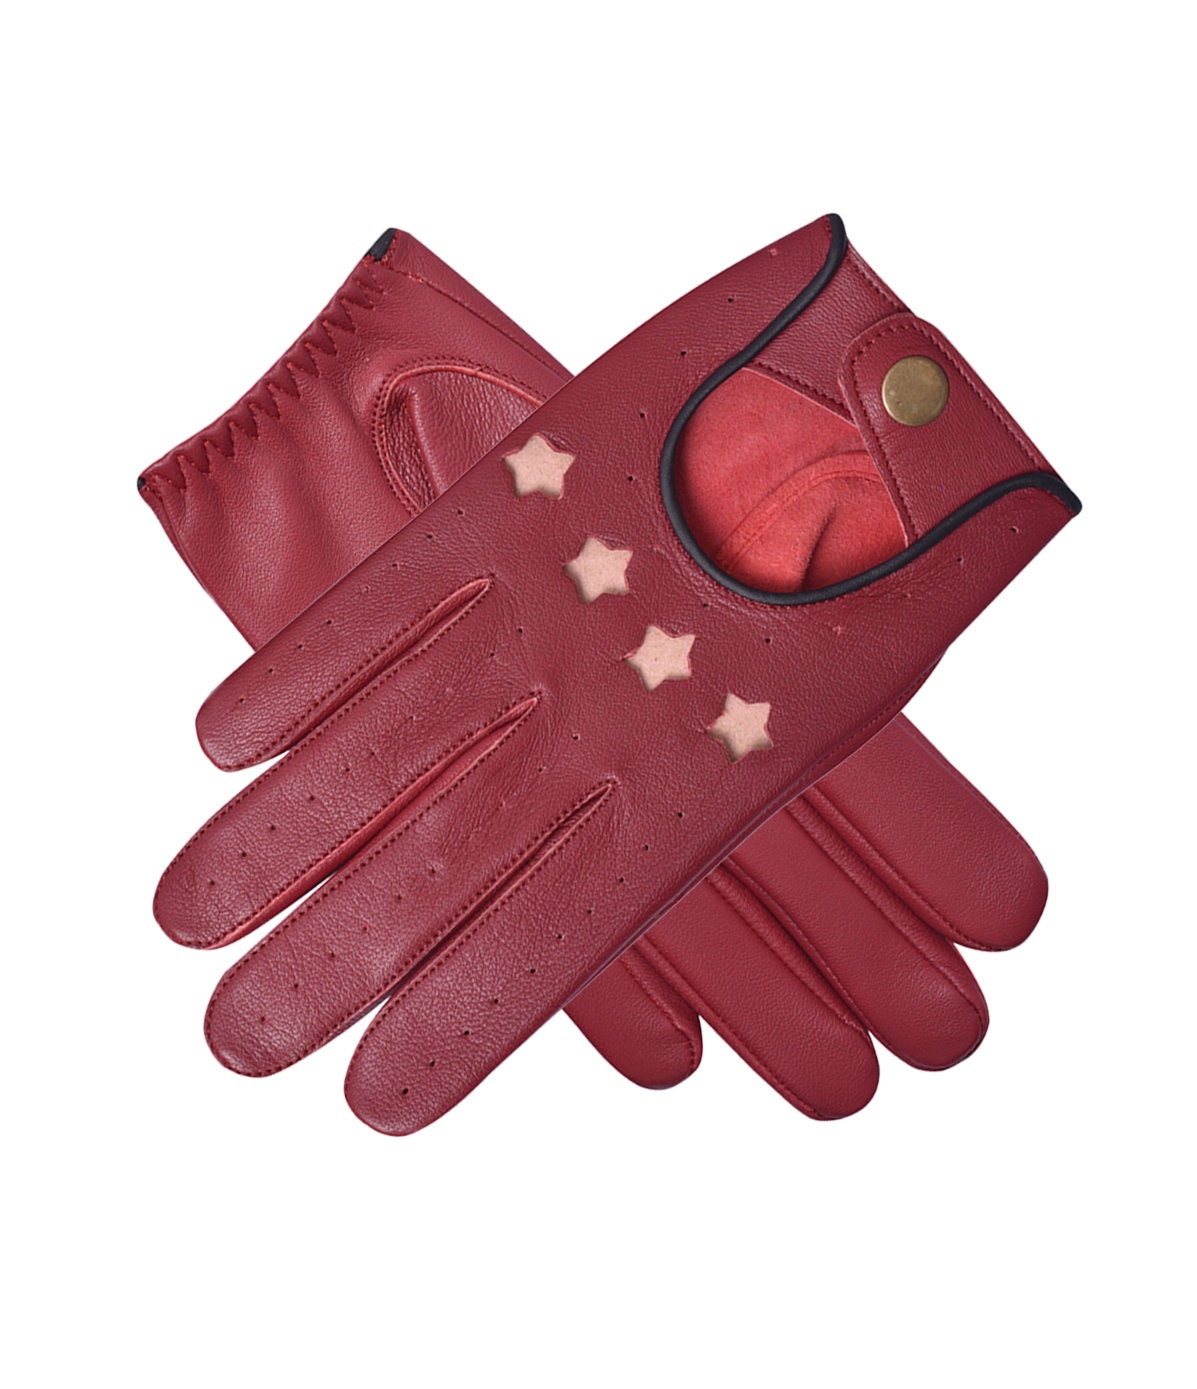 Mr. Pen- Leather Work Gloves, Medium (Check Dimensions in Second Picture)  Work Gloves for Men & Women, Leather Gloves, Leather Garden Gloves, Working